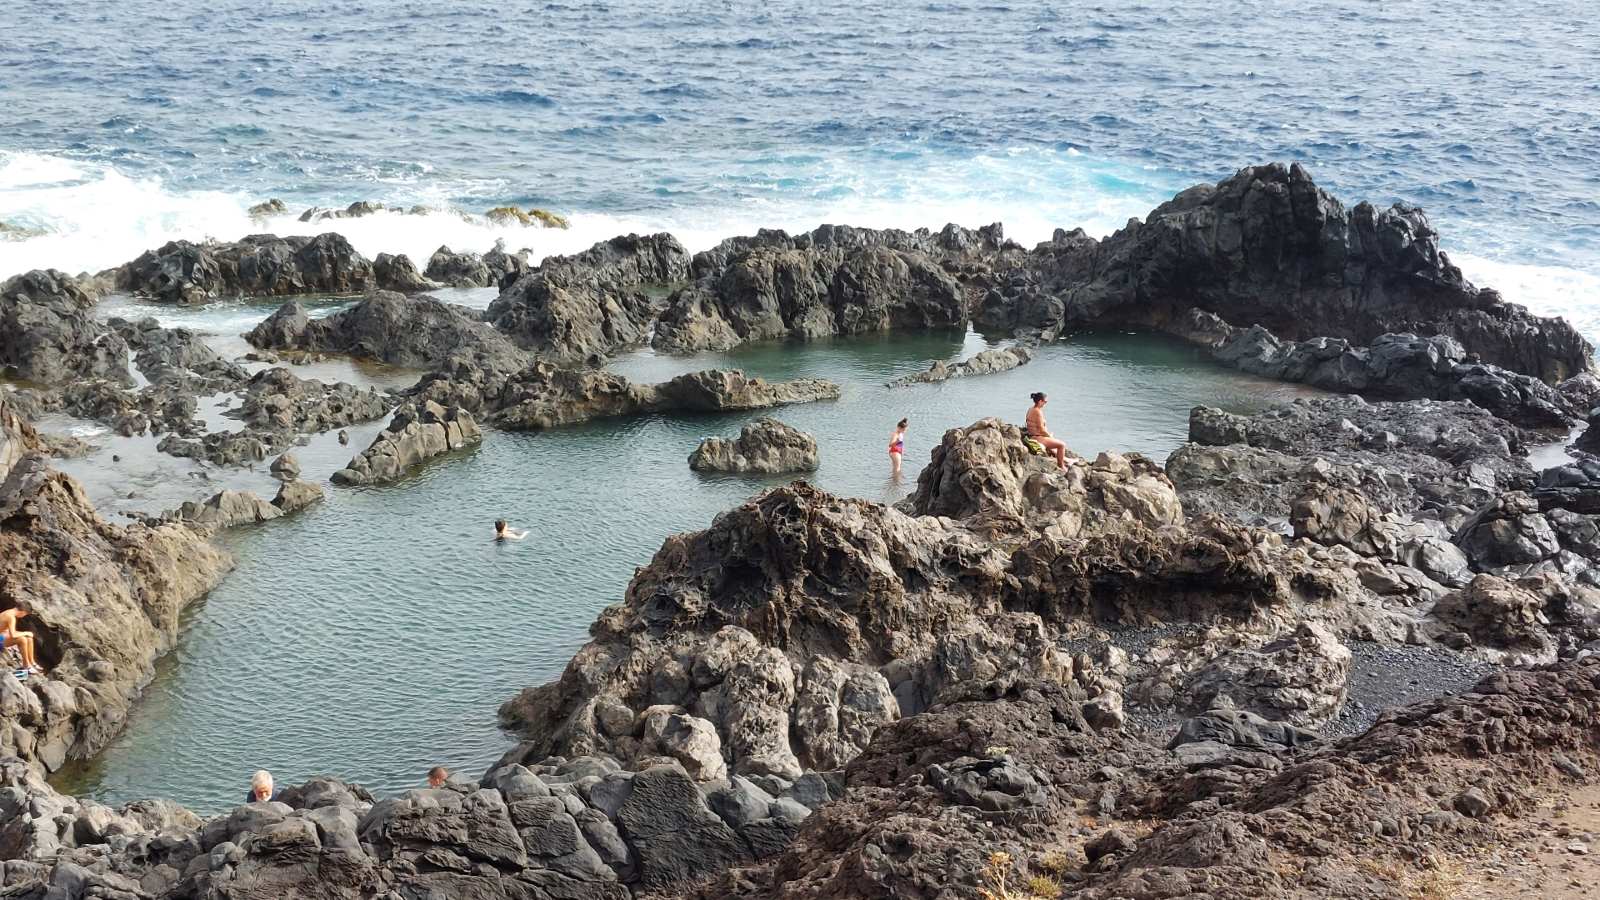 Charco de Las Mujeres is one of the largest natural pools in the north of Tenerife